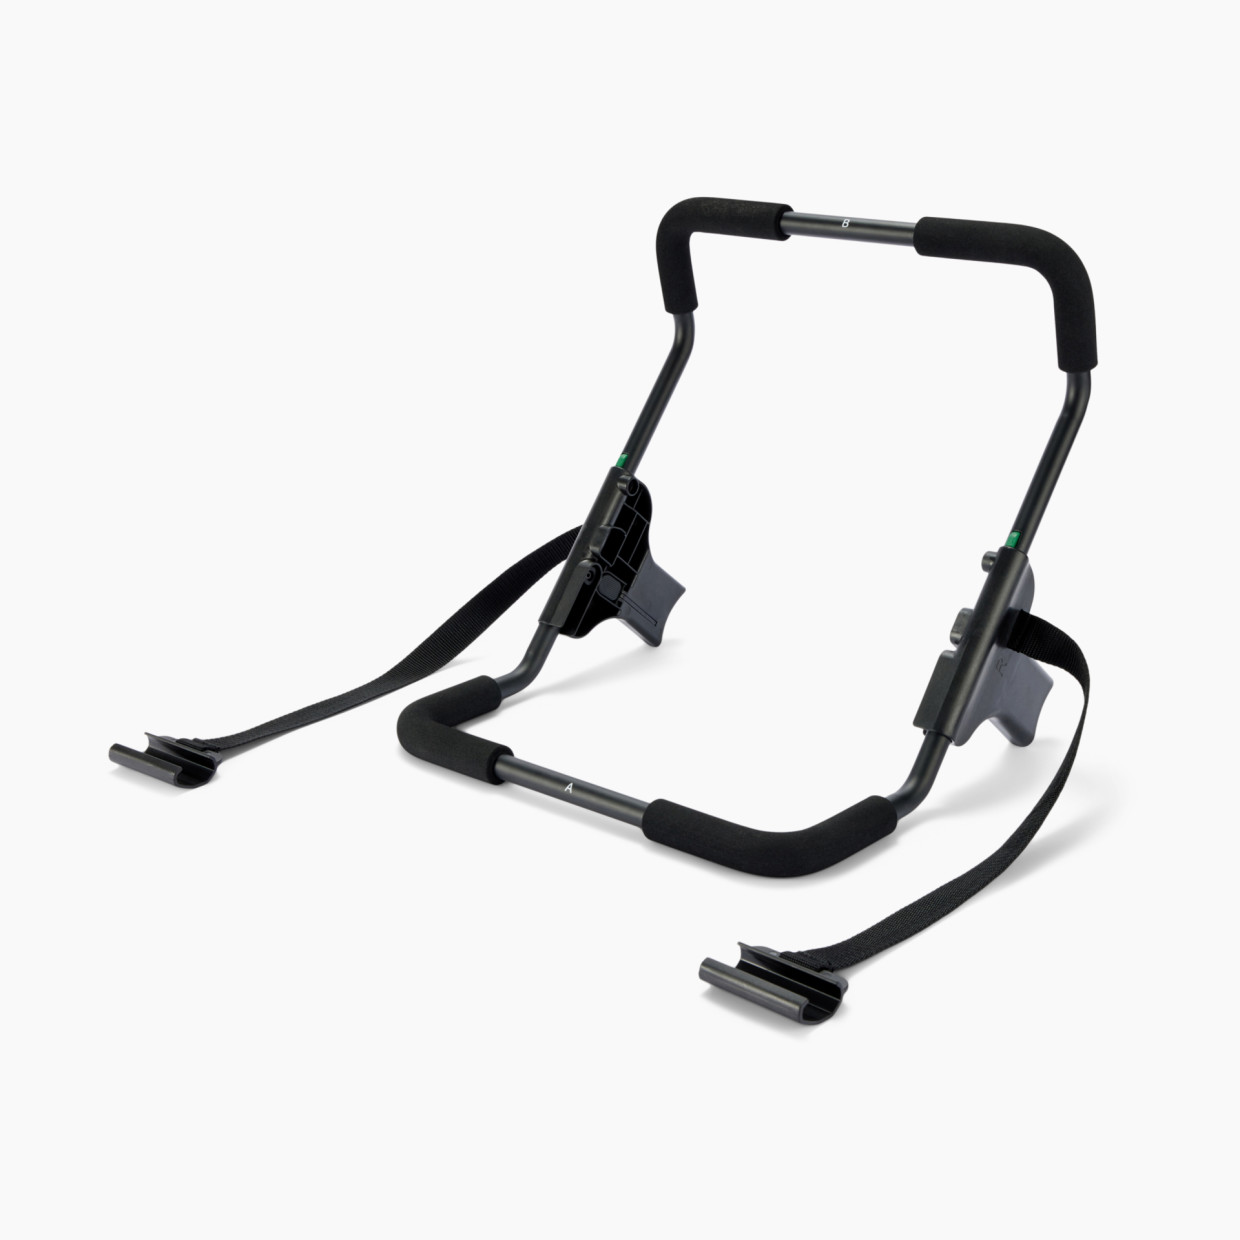 Baby Jogger Car Seat Adapter for City Sights Stroller - Chicco.